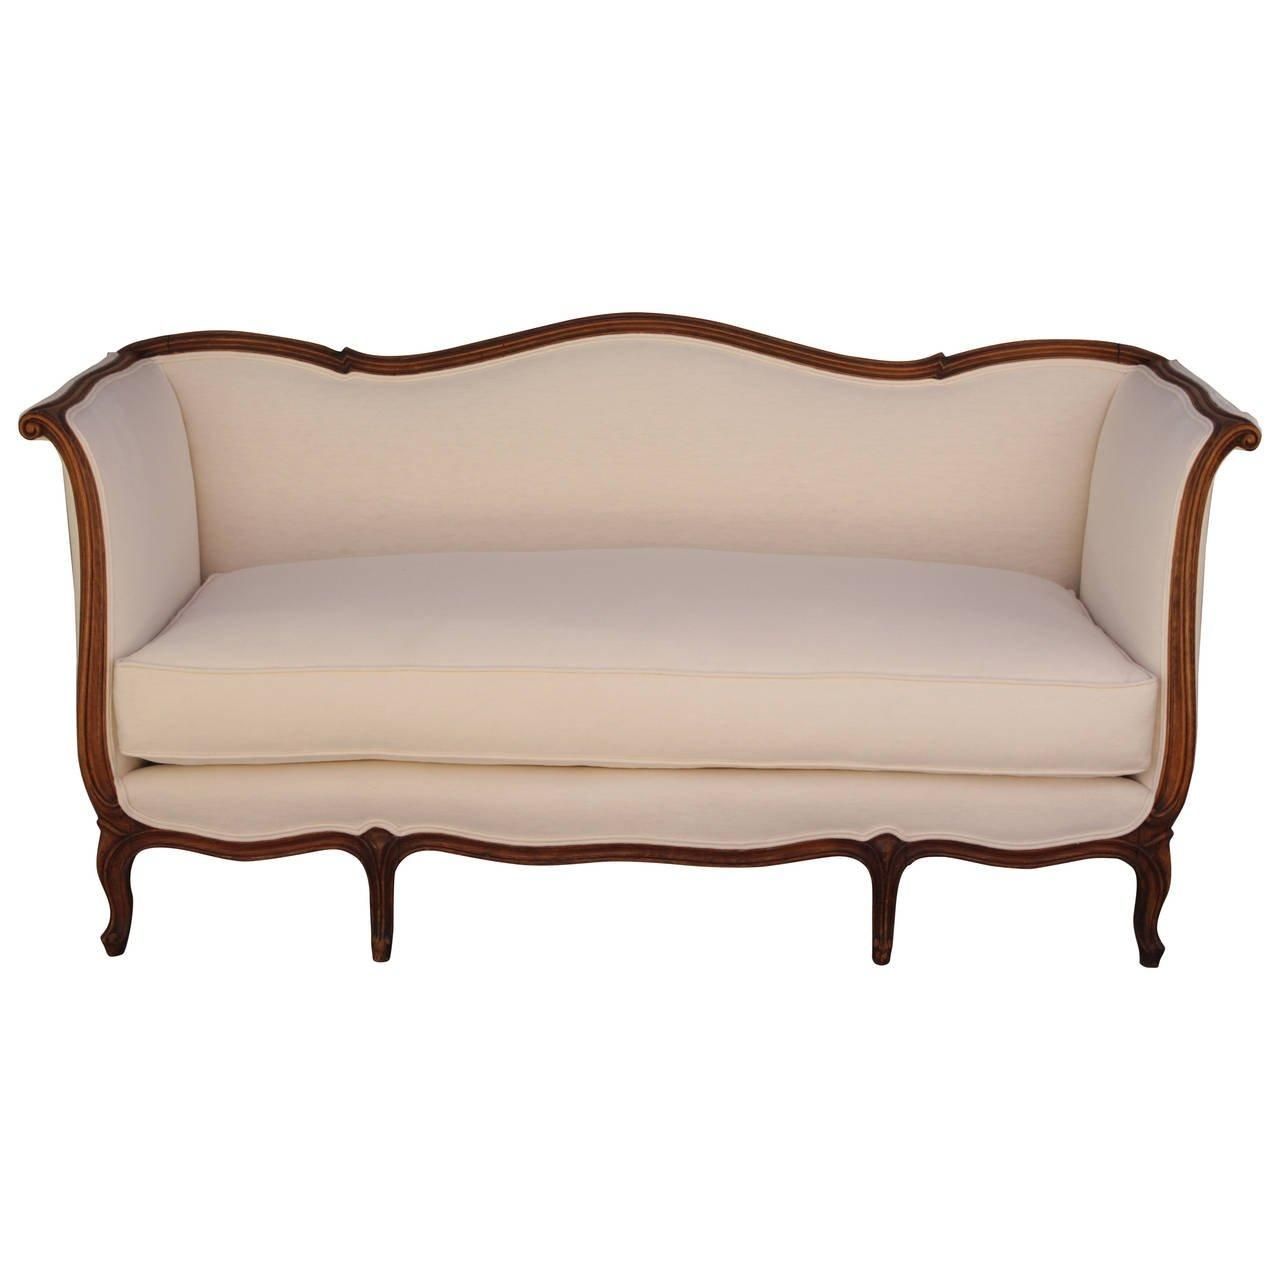 French Louis Xv Style Sofa With Linen Upholstery At 1stdibs Throughout French Style Sofas (View 2 of 20)